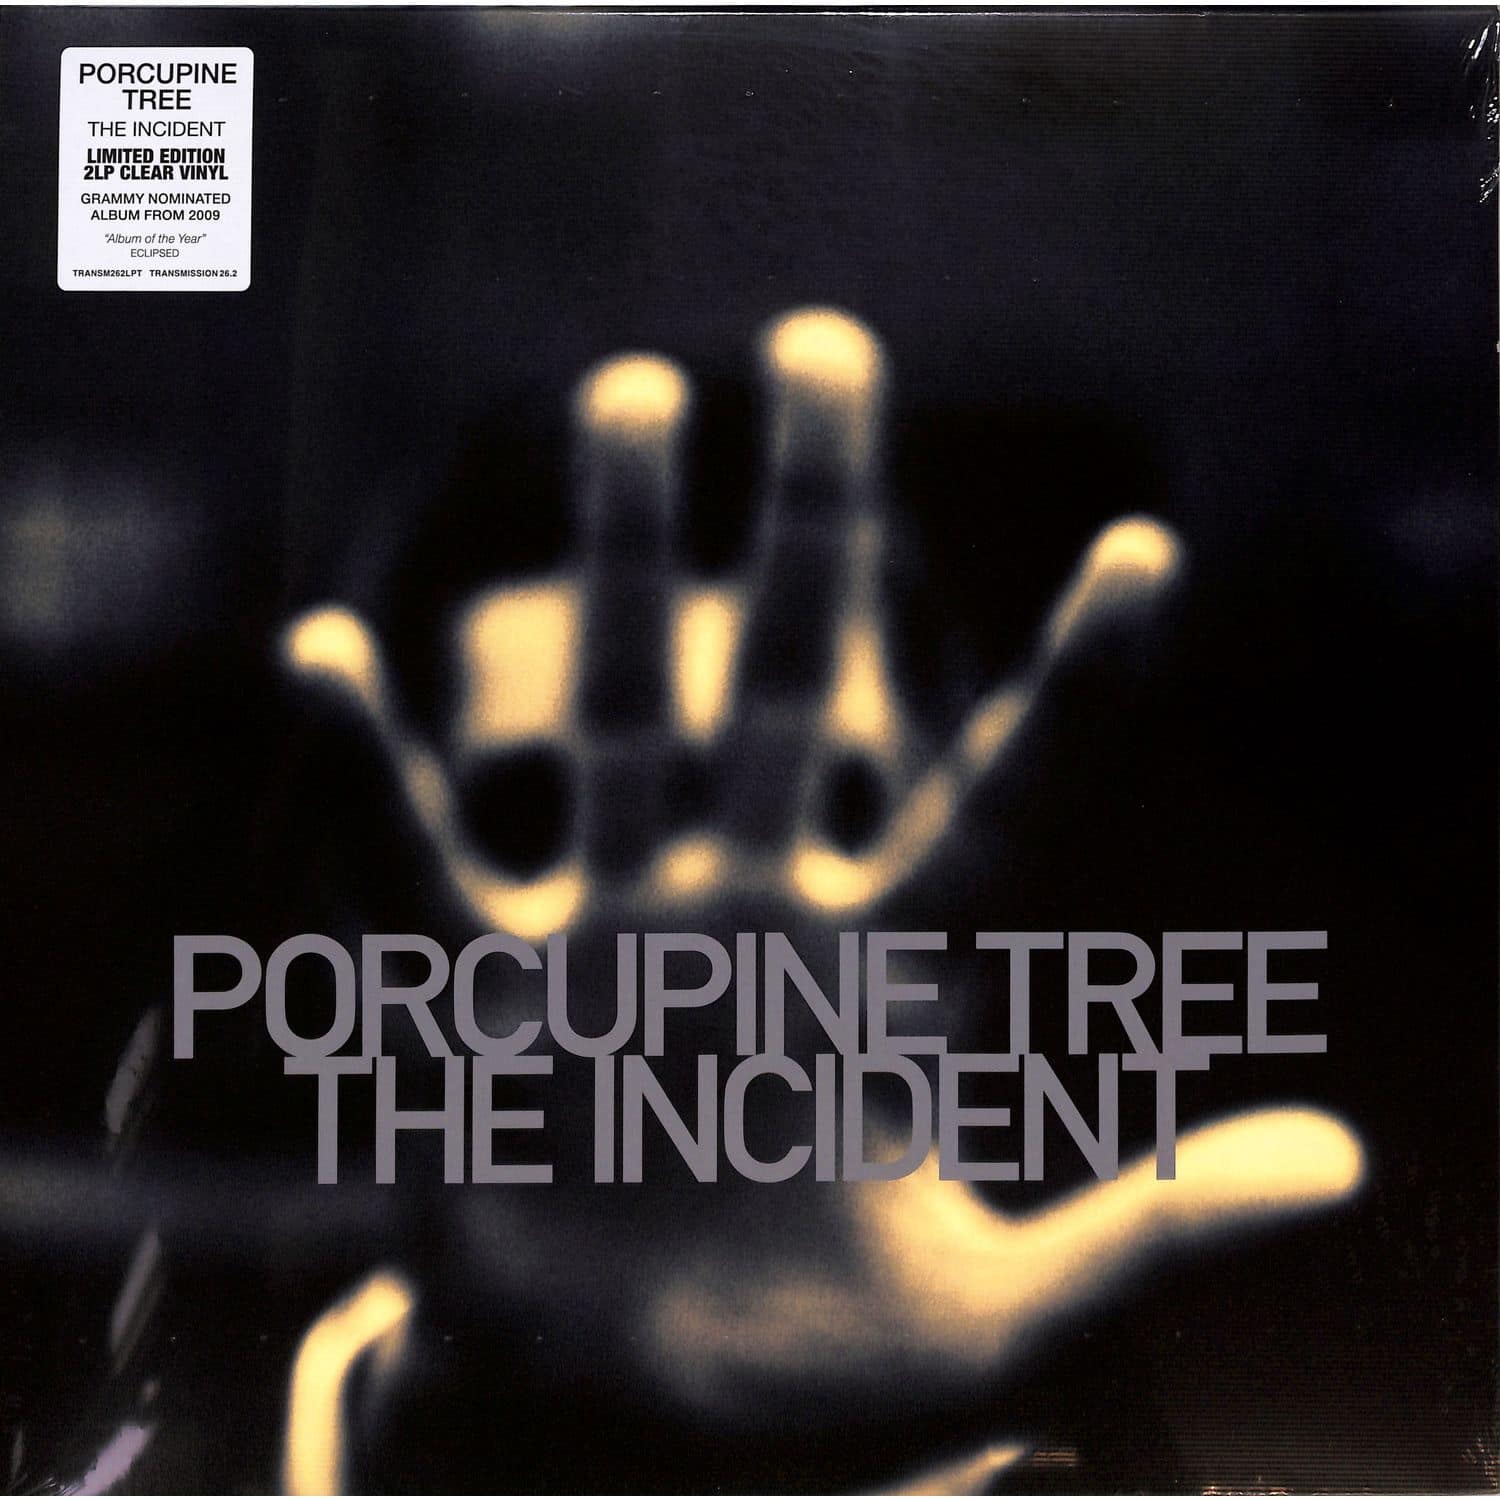 Porcupine Tree - THE INCIDENT 